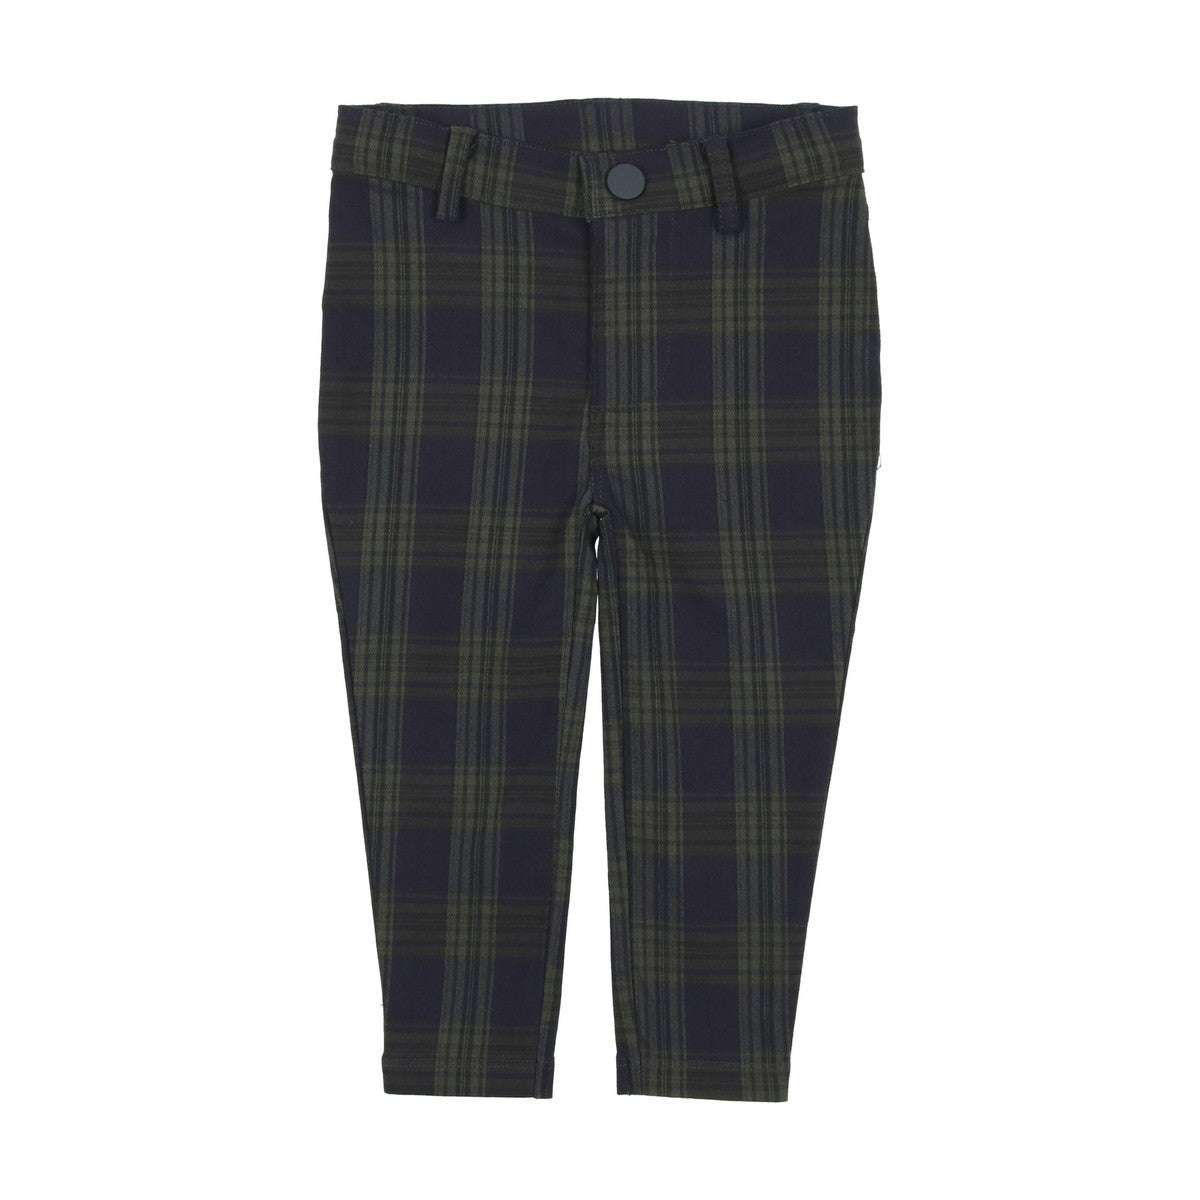 Analogie Forest Plaid Pants